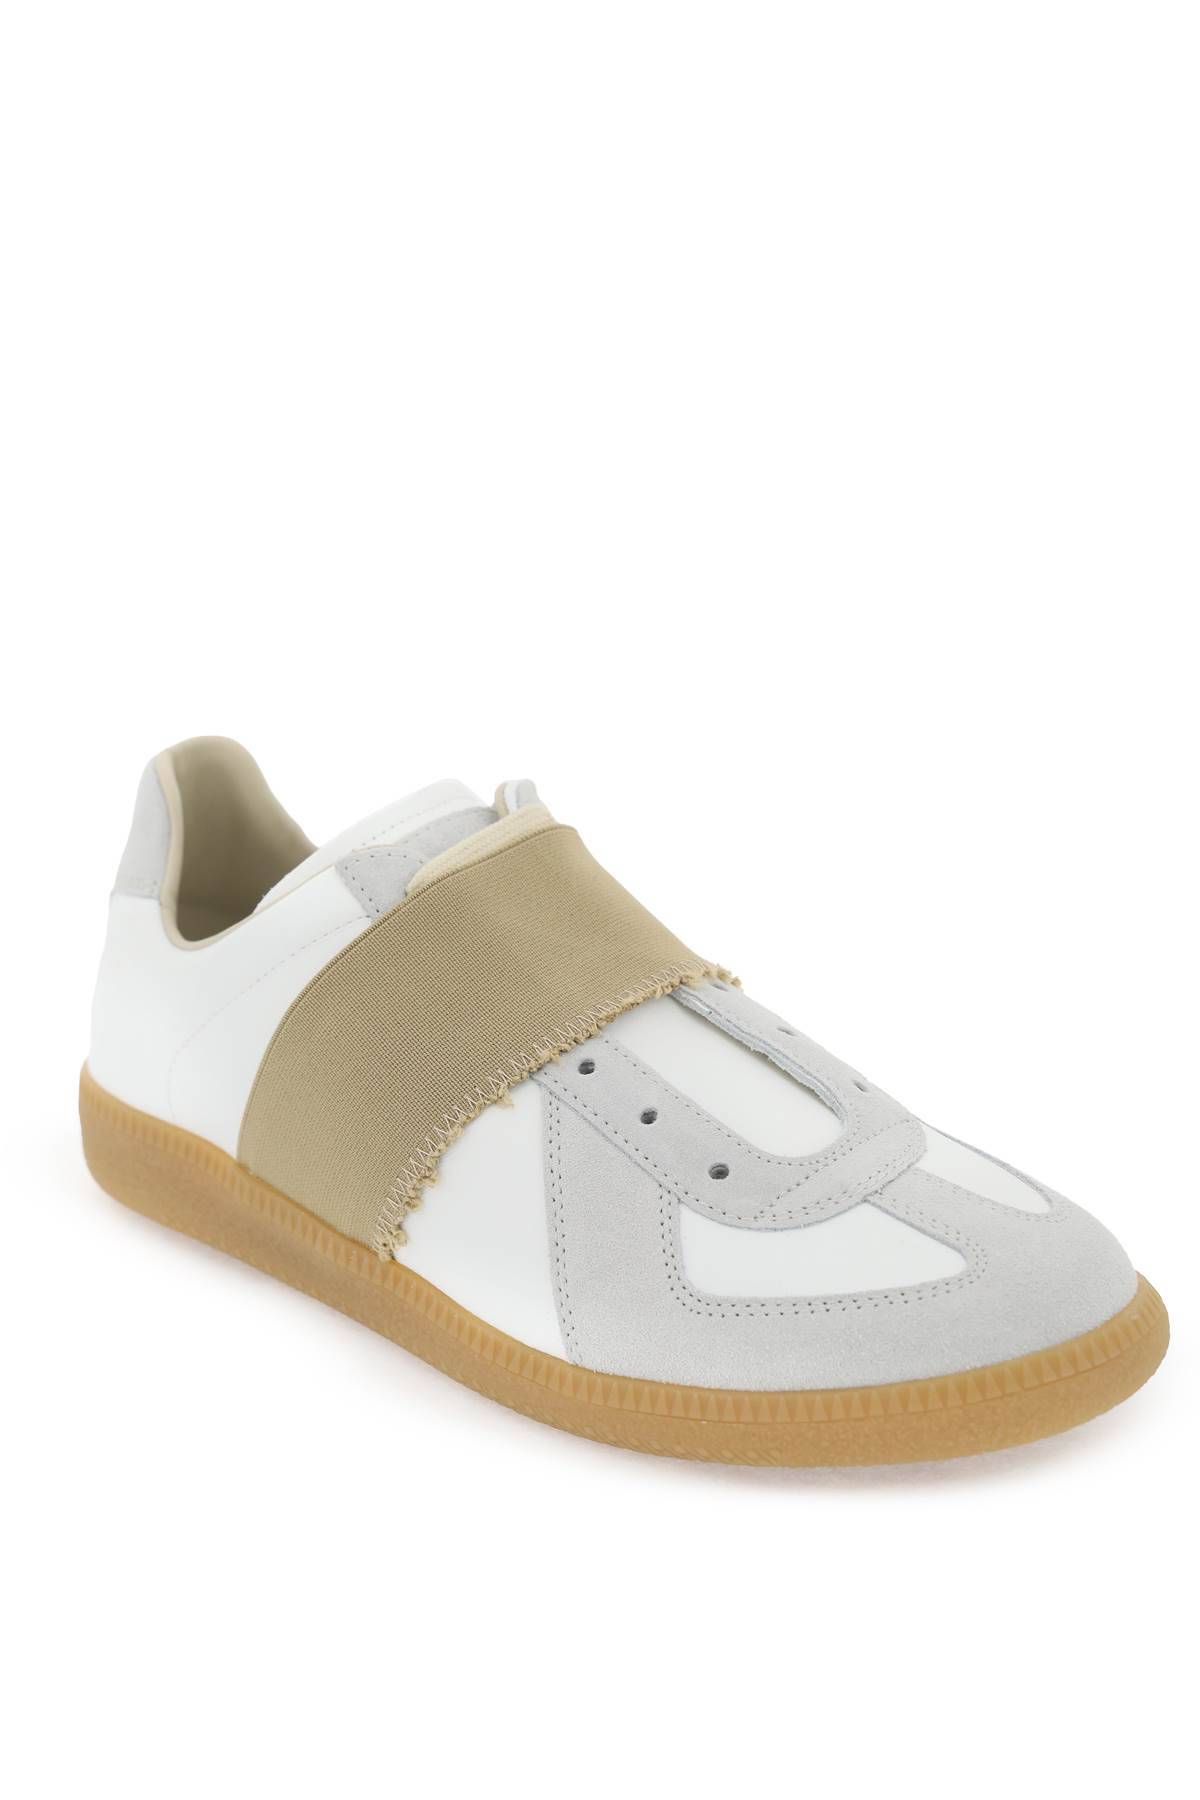 Replica Leather Sneakers W/elastic Band